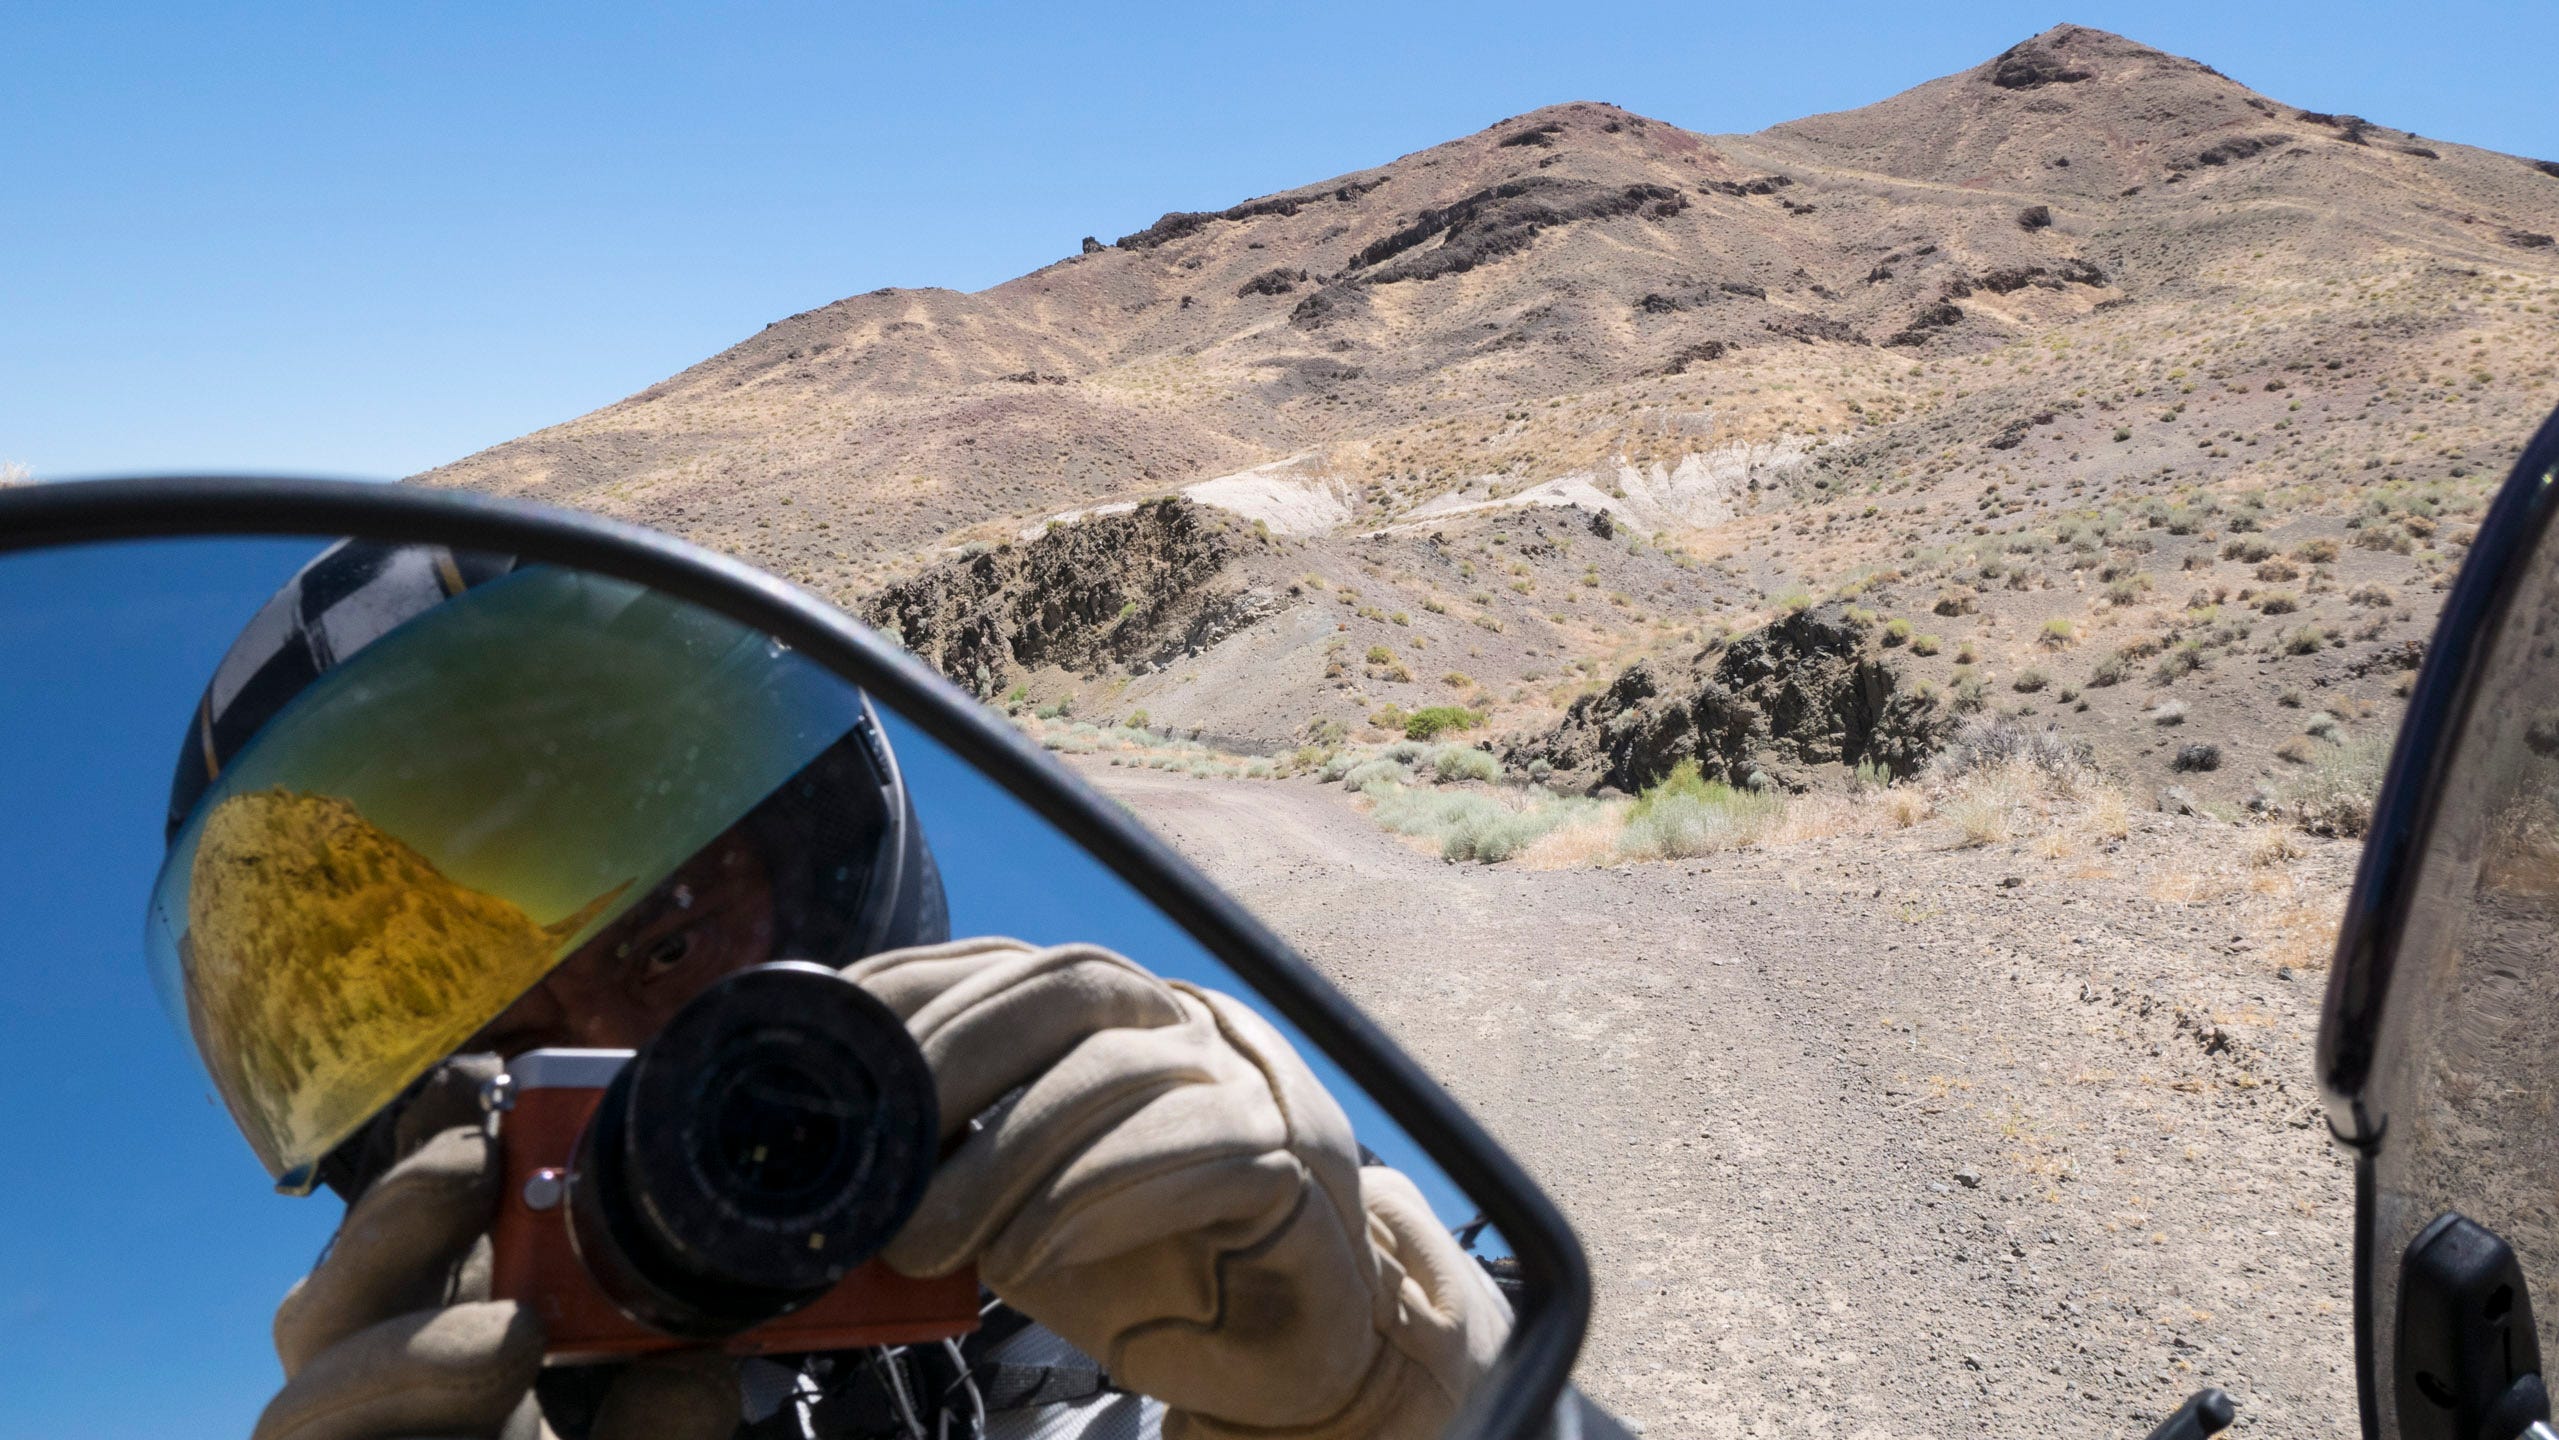 Photo from the seat of a motorcycle, including the land ahead of the motorcycle, a piece of the windshield on the right edge of the photo, and the author reflected in the left rearview mirror in the lower left corner of the photo. The land ahead of the motorcycle is a tall, naked mountain in the desert with multiple, weather-worn peaks leading up to a naked top. Small clumps of grass grow in patches and exposed, dark rock appear on the hill in places. The dirt road that the motorcycle on bend to the left. The author reflected in the mirror of the motorcycle is wearing elkskin leather gloves and a black helmet with a checkerboard strip pattern along the top and a gold reflective visor that has been flipped up a little for ventilation. The reflection in the visor is more scrub brush growing in the sandy soil and the blue sky, both tinted gold. The author is holding a small orange camera with a black lens that is being used to take the photo.